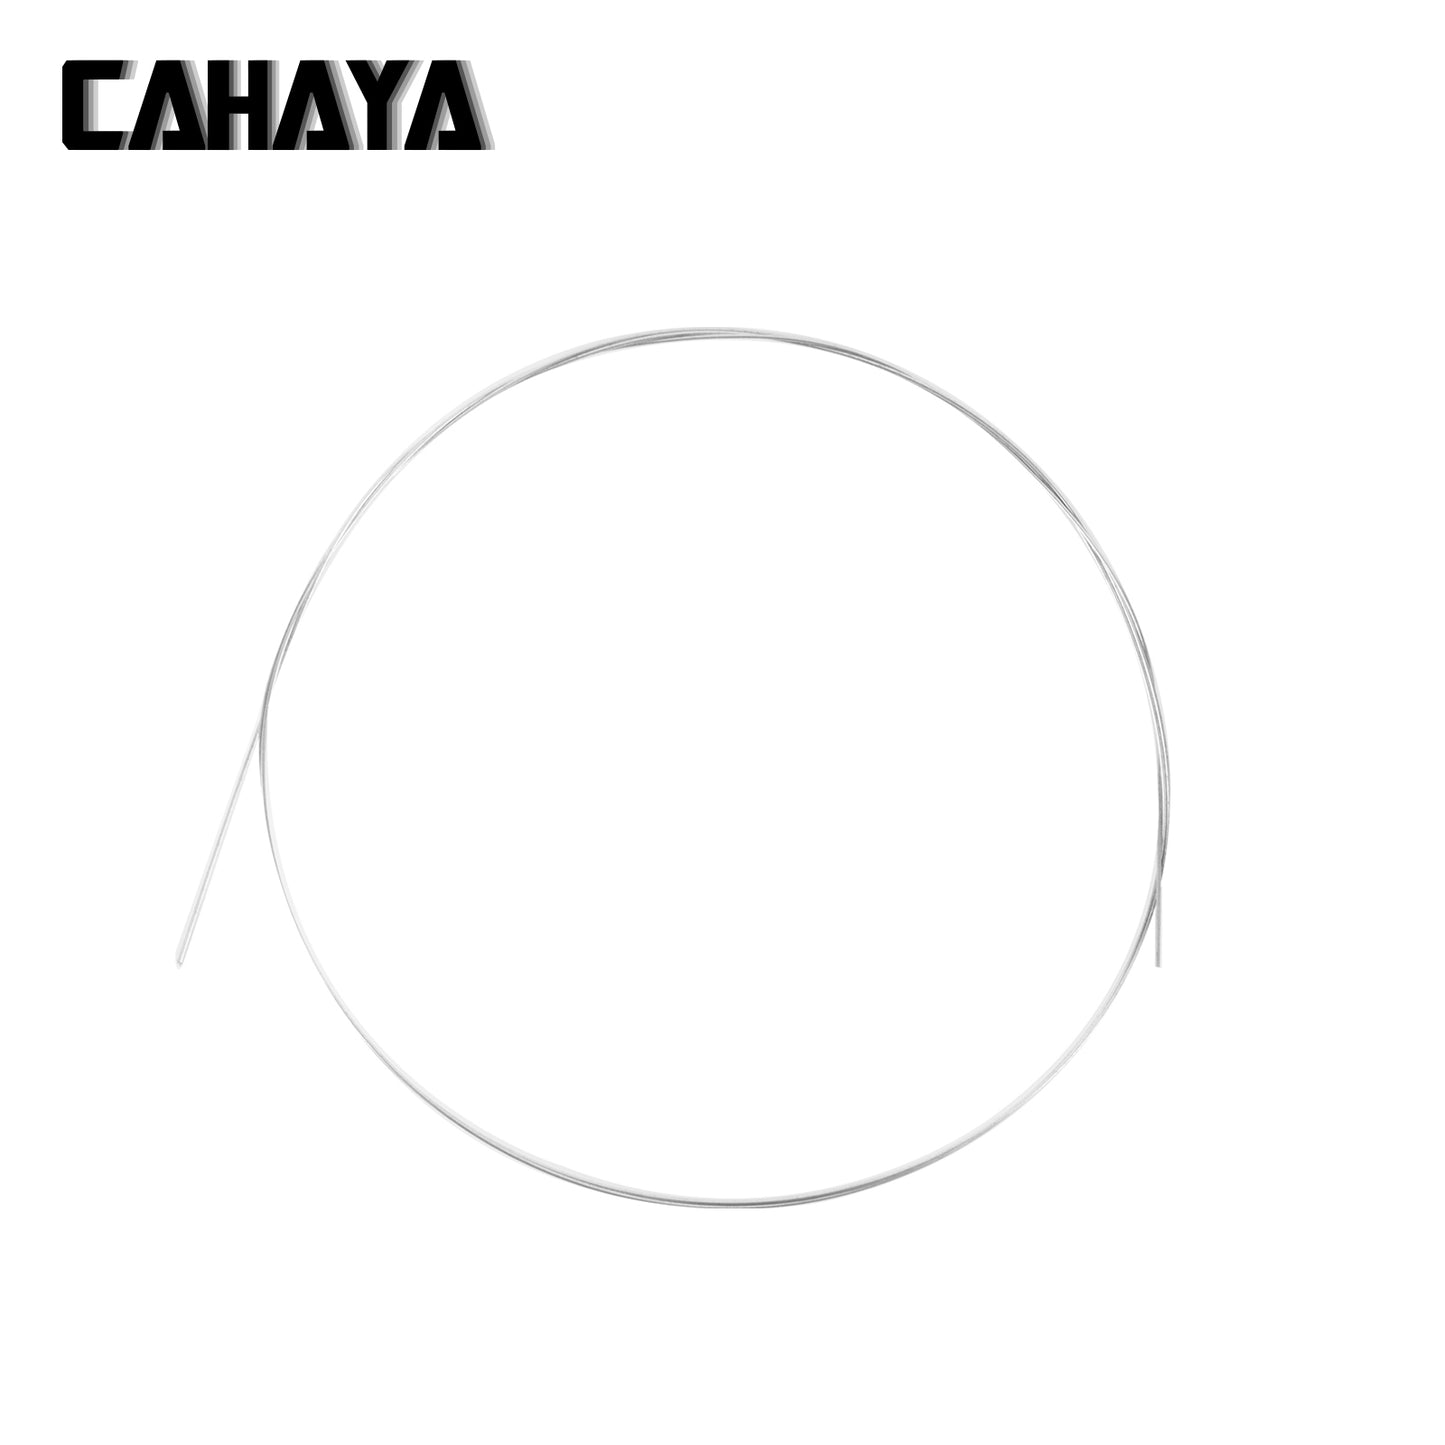 CAHAYA Piano Strings Silver Replacement Strings